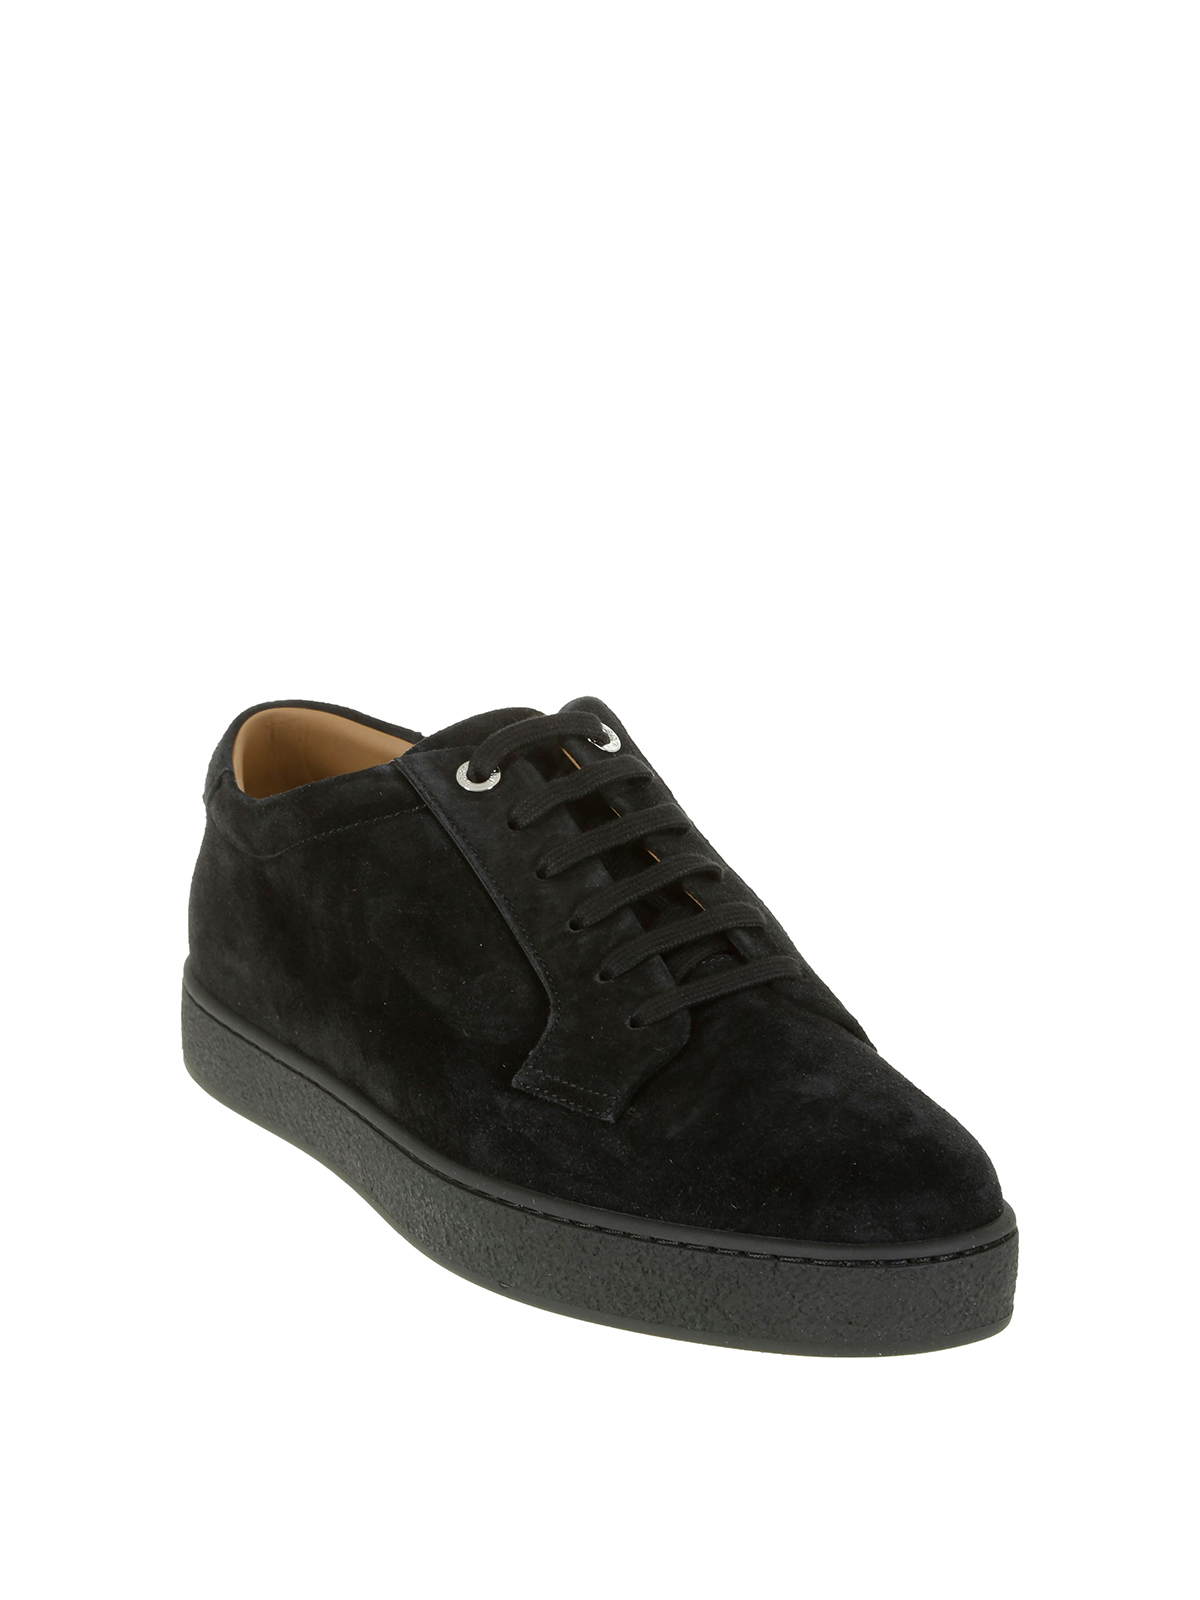 Trainers John Lobb - Molton sneakers - MOLTONSUEDE1R